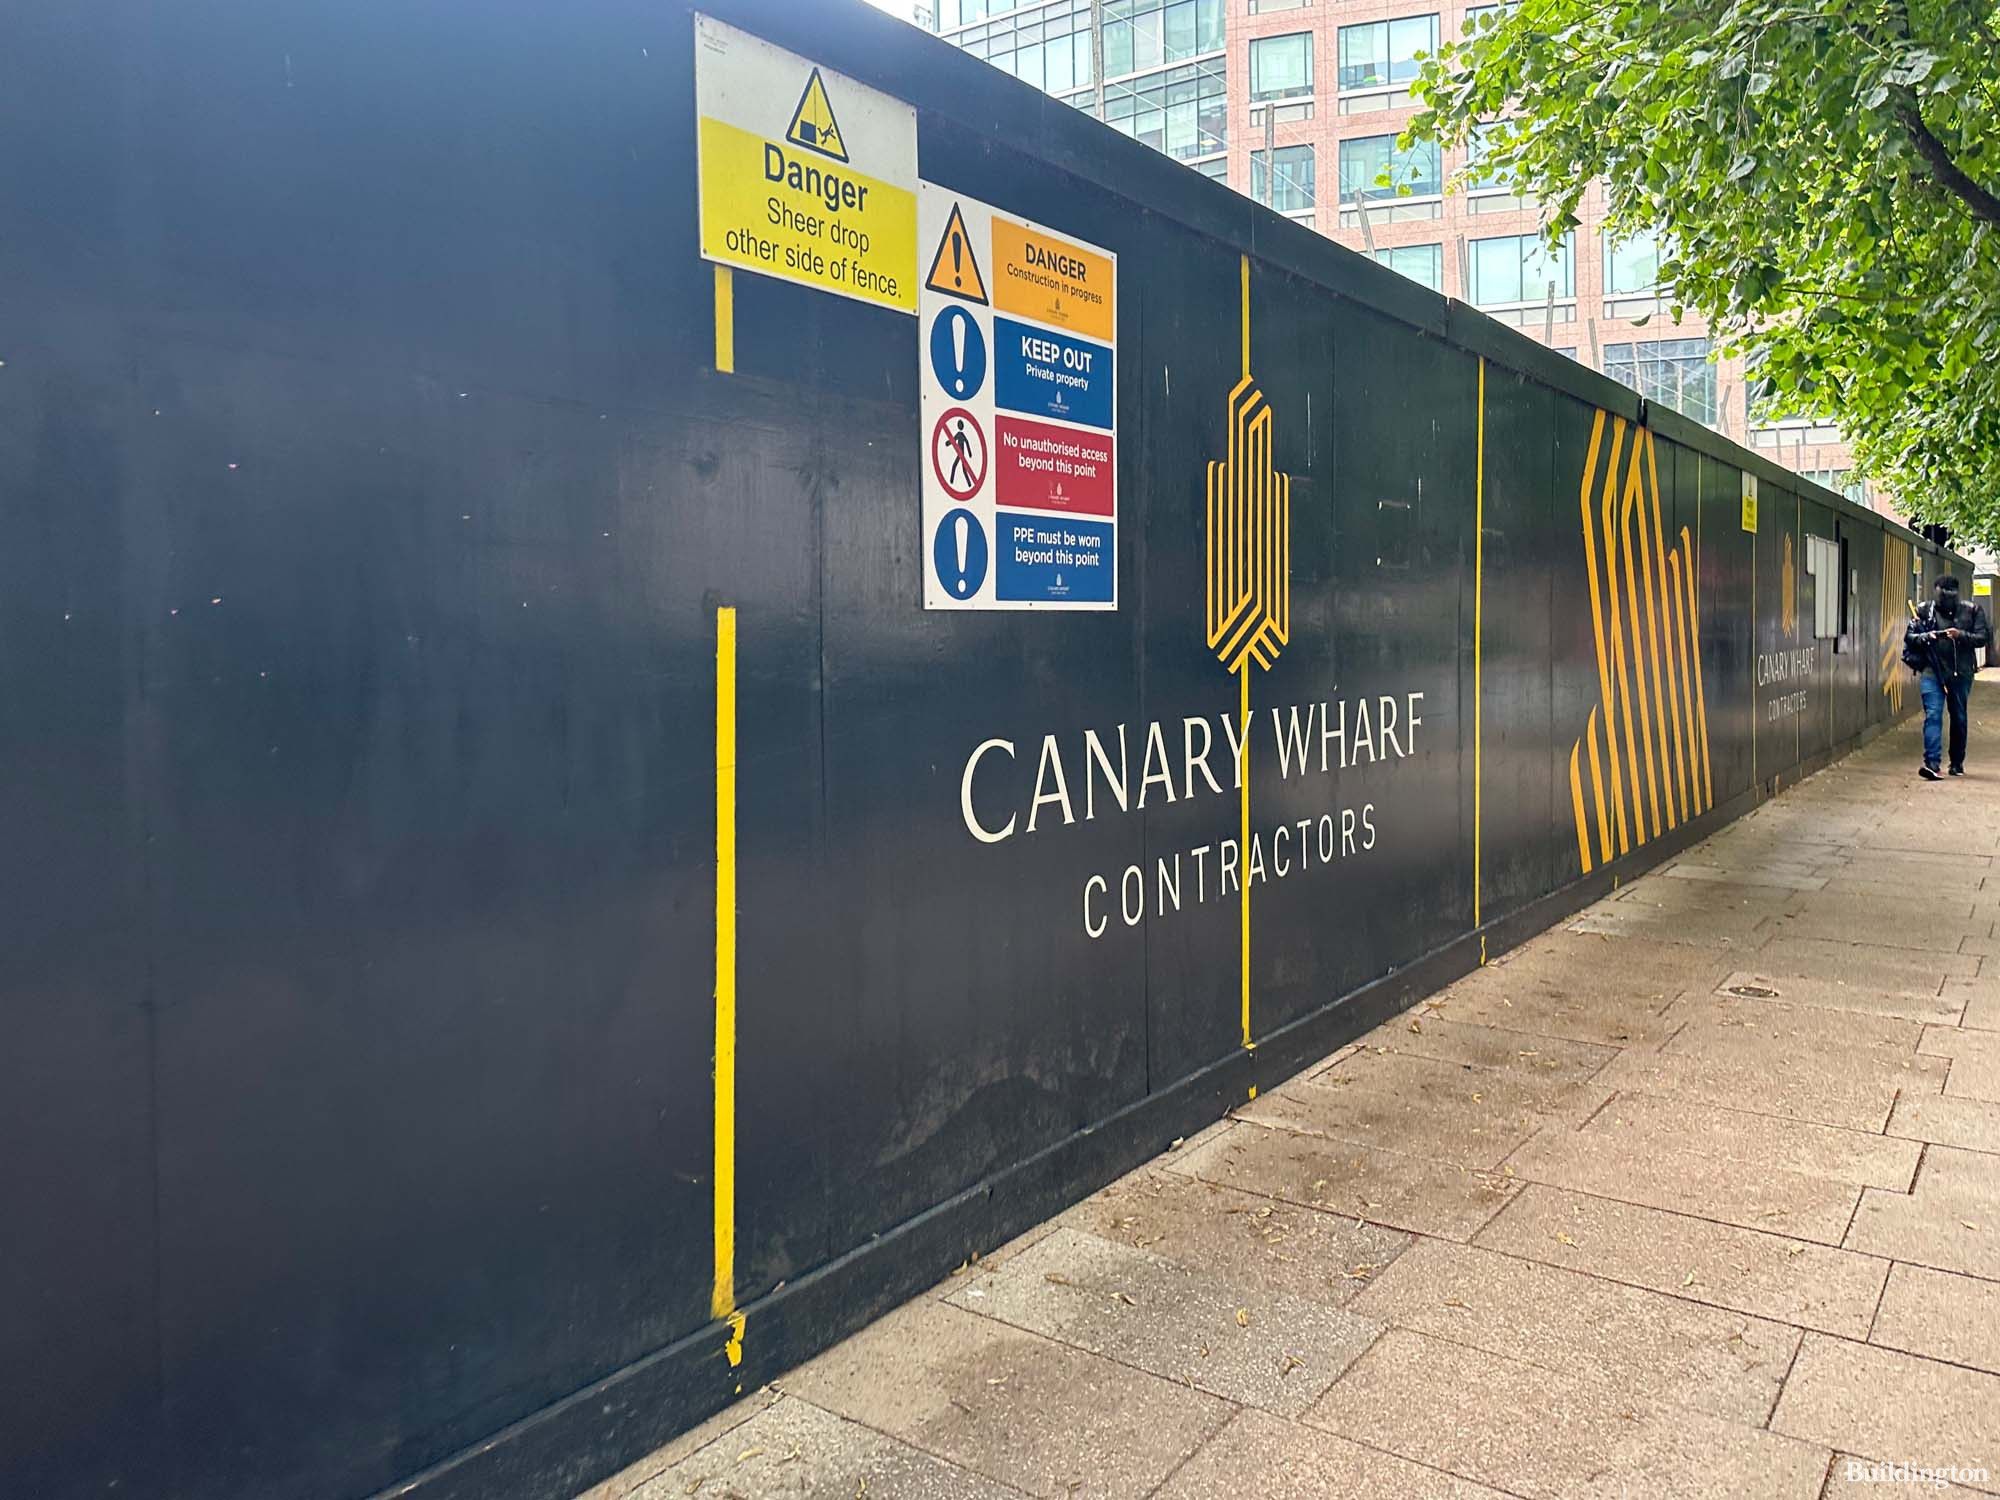 Park Place development hoarding by Canary Wharf Contractors on West India Avenue in Canary Wharf in Summer 2023.